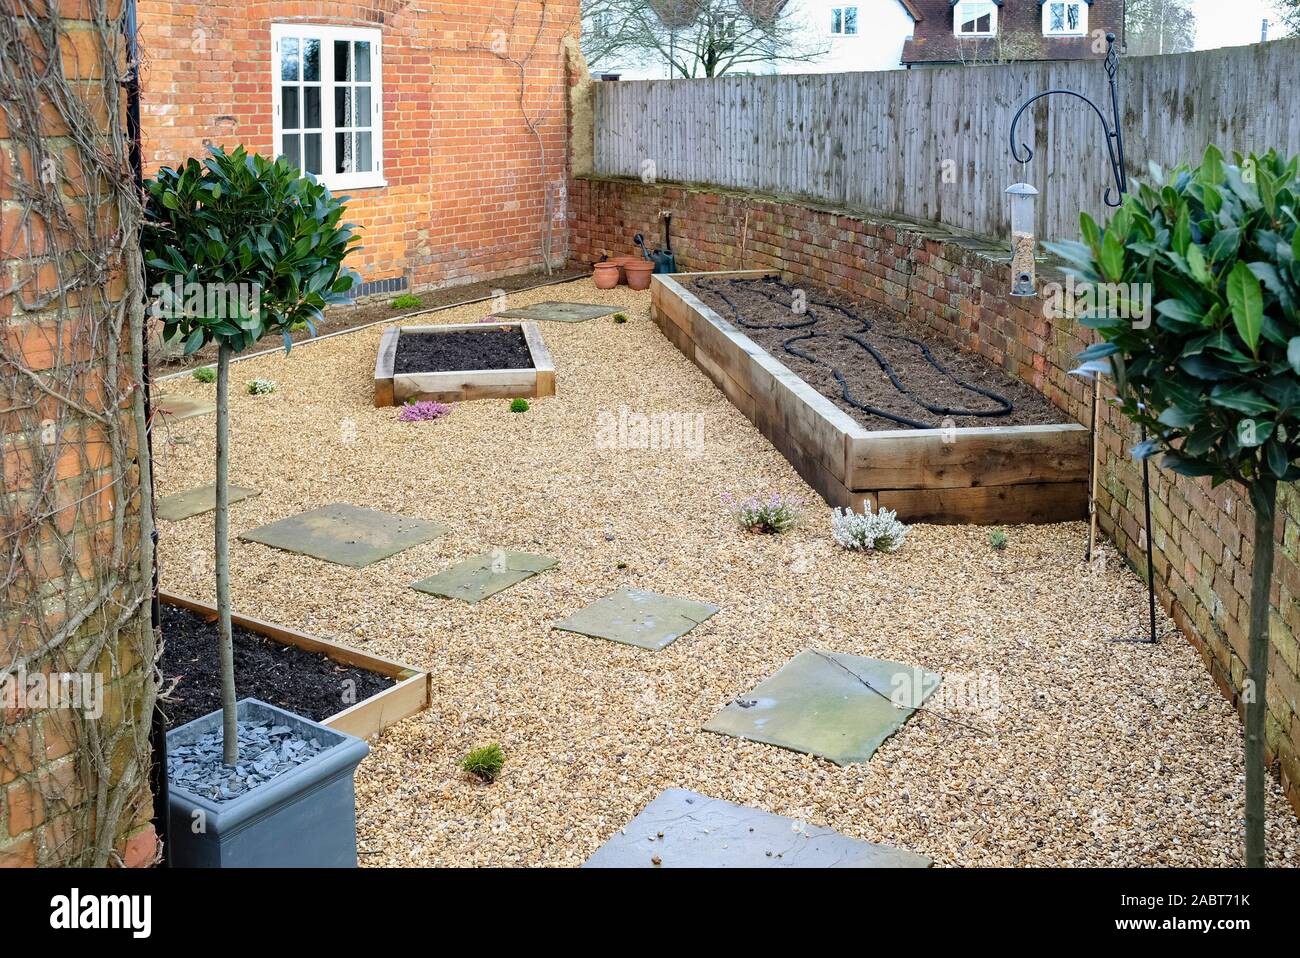 Small garden design with hard landscaping, gravel and york stone path, oak sleeper raised beds and bay trees Stock Photo